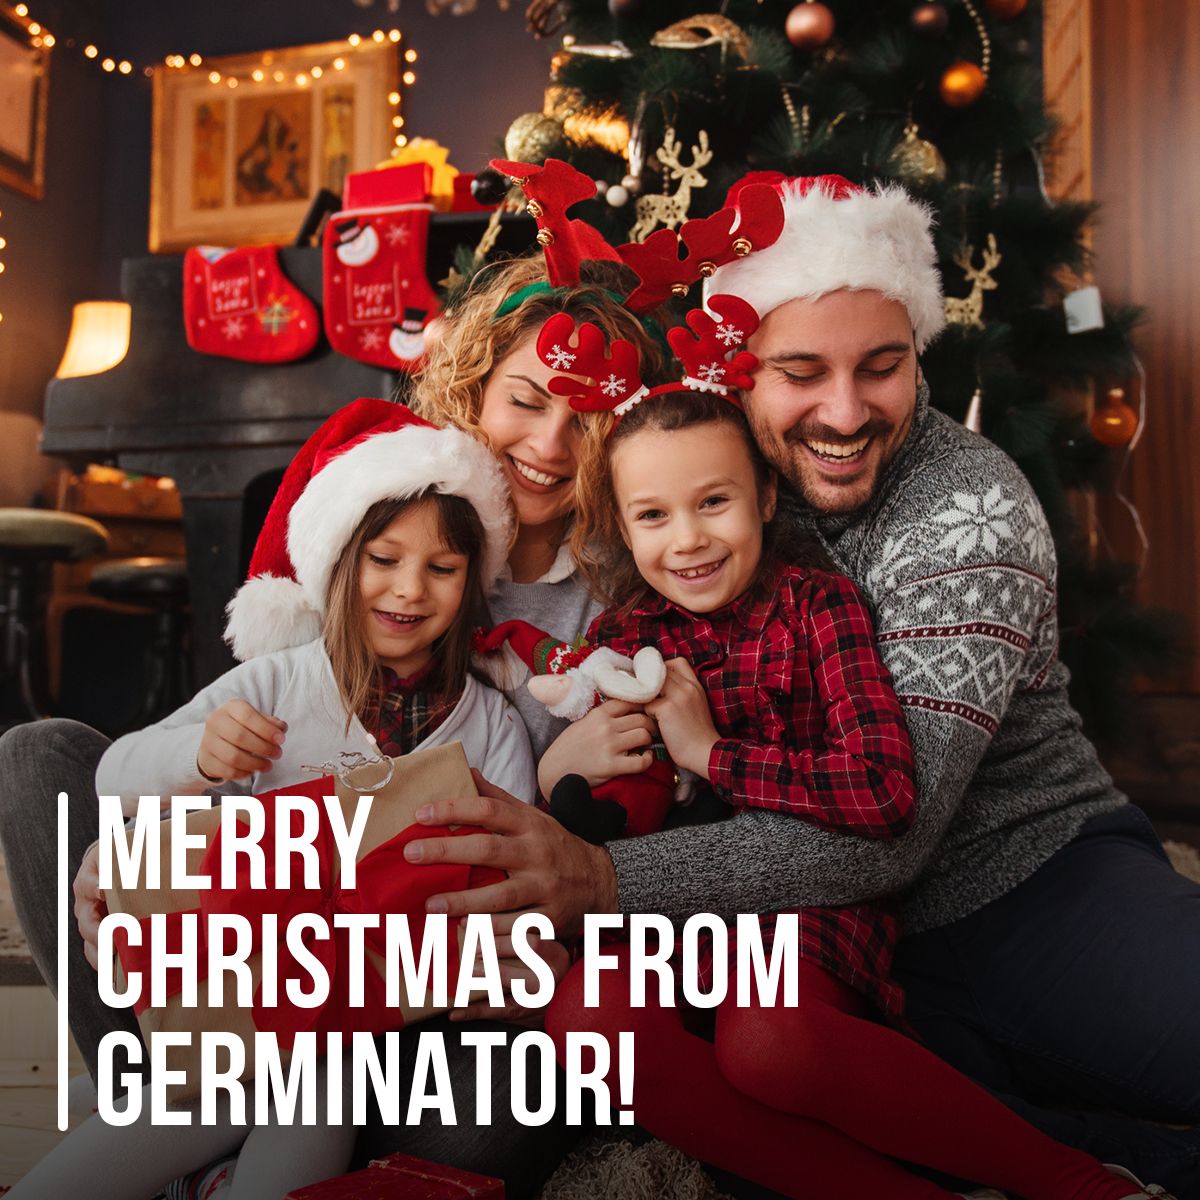 Merry Christmas From Germinator!